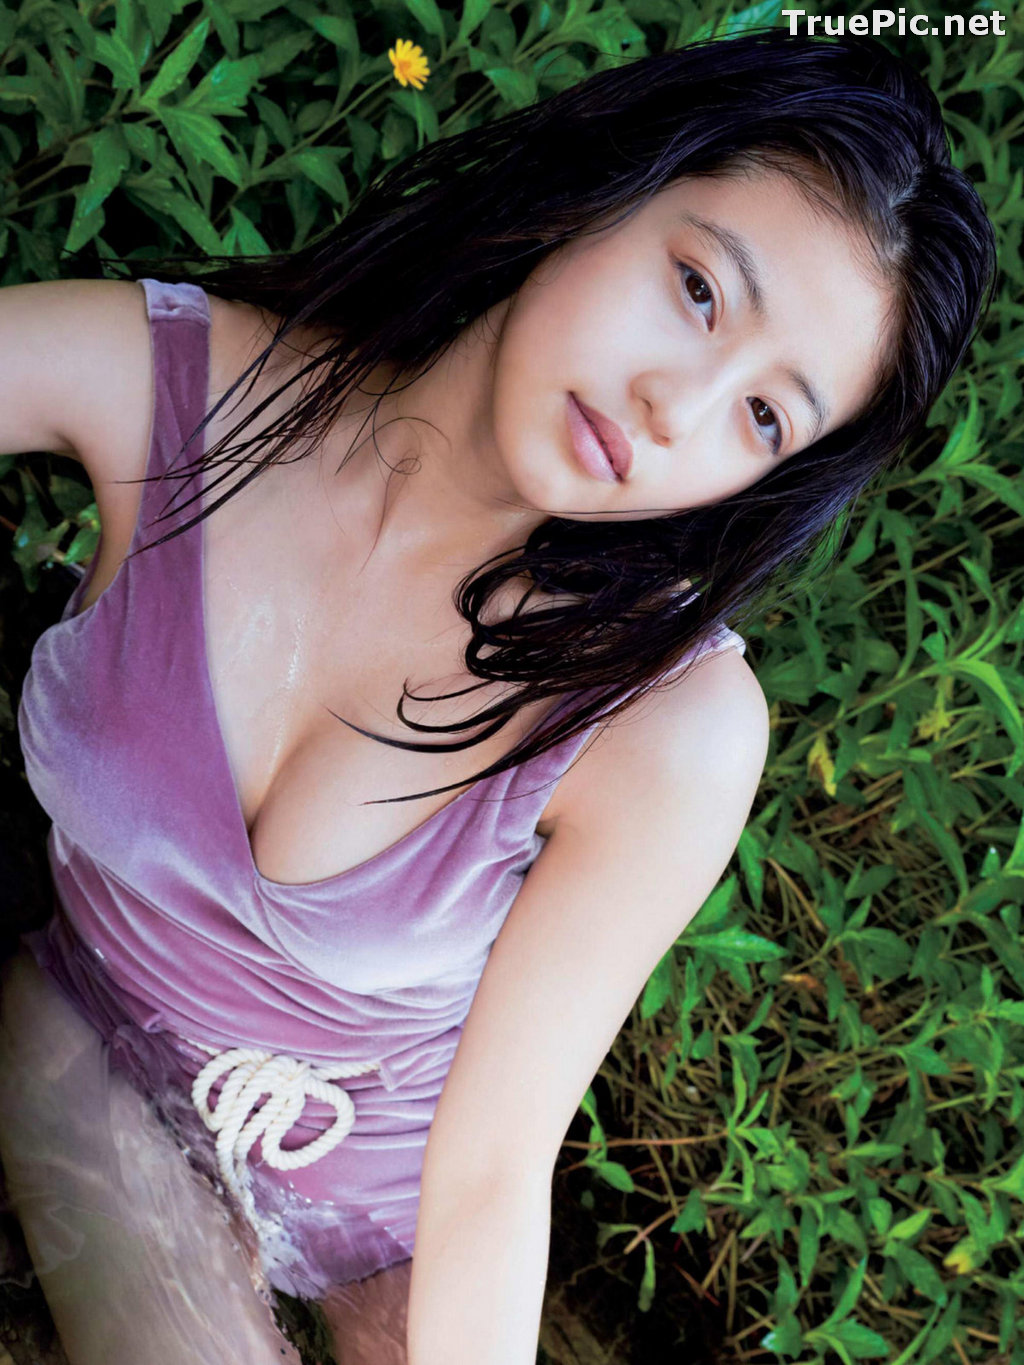 Image Japanese Actress and Model - Mio Imada (今田美櫻) - Sexy Picture Collection 2020 - TruePic.net - Picture-189